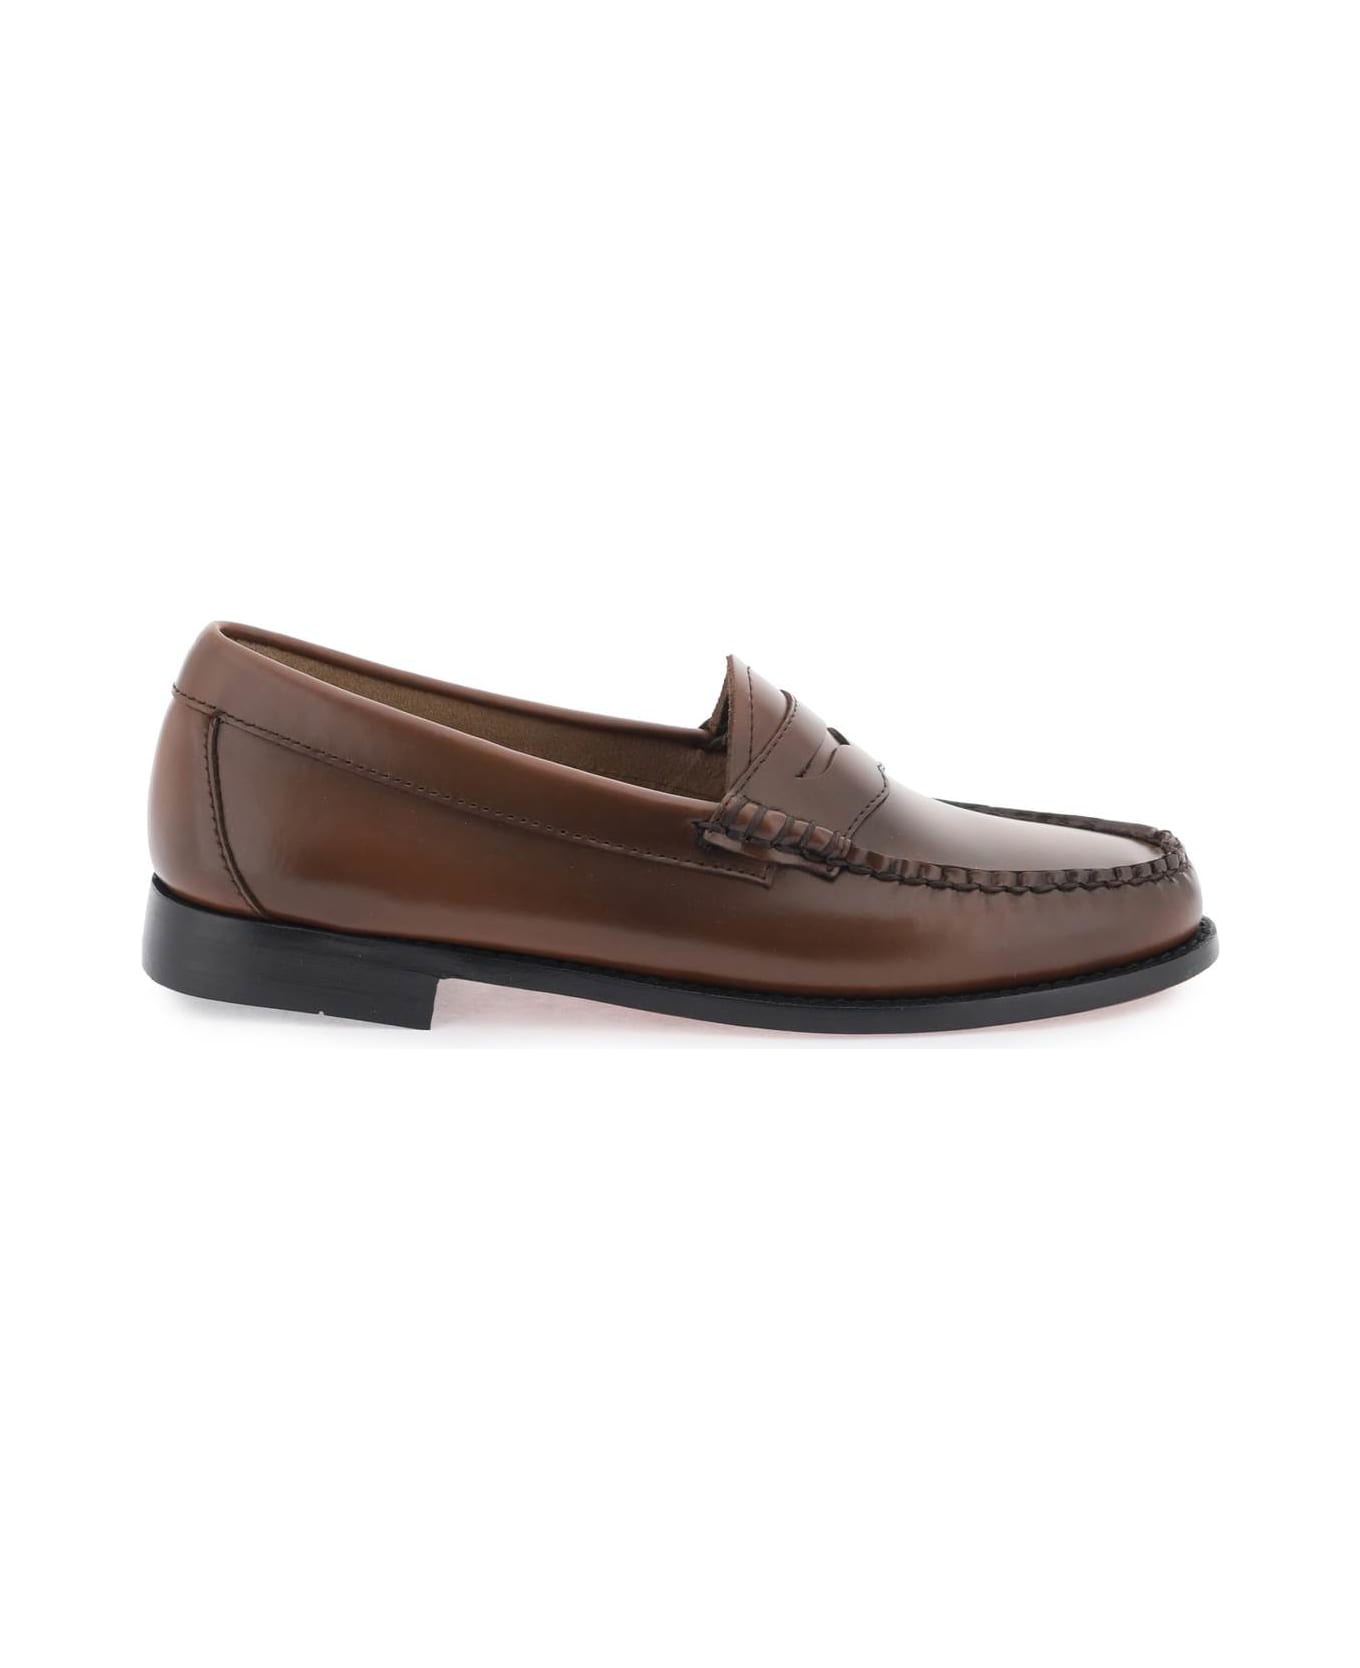 G.H.Bass & Co. 'weejuns' Penny Loafers - COGNAC (Brown)